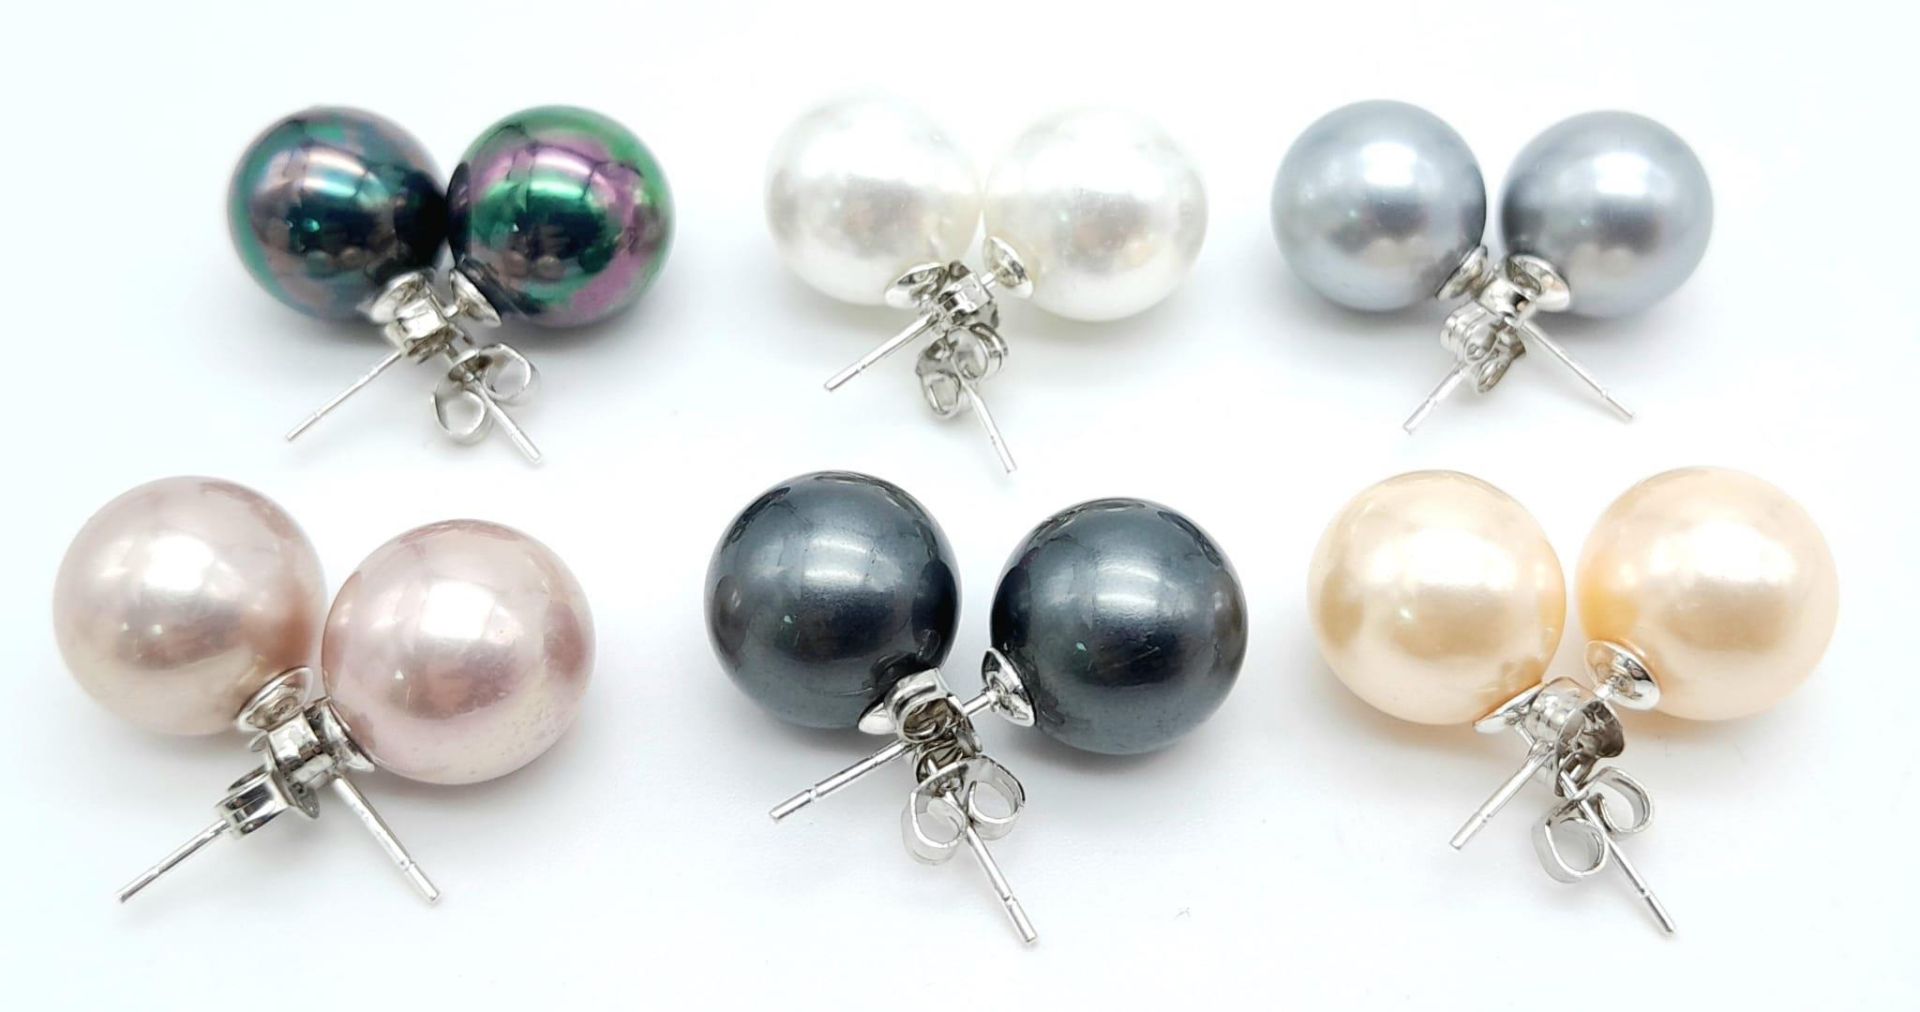 Six Pairs of Colourful Metallic South Sea Pearl Shell 12mm Bead Stud Earrings. Set in 925 silver. - Image 5 of 7